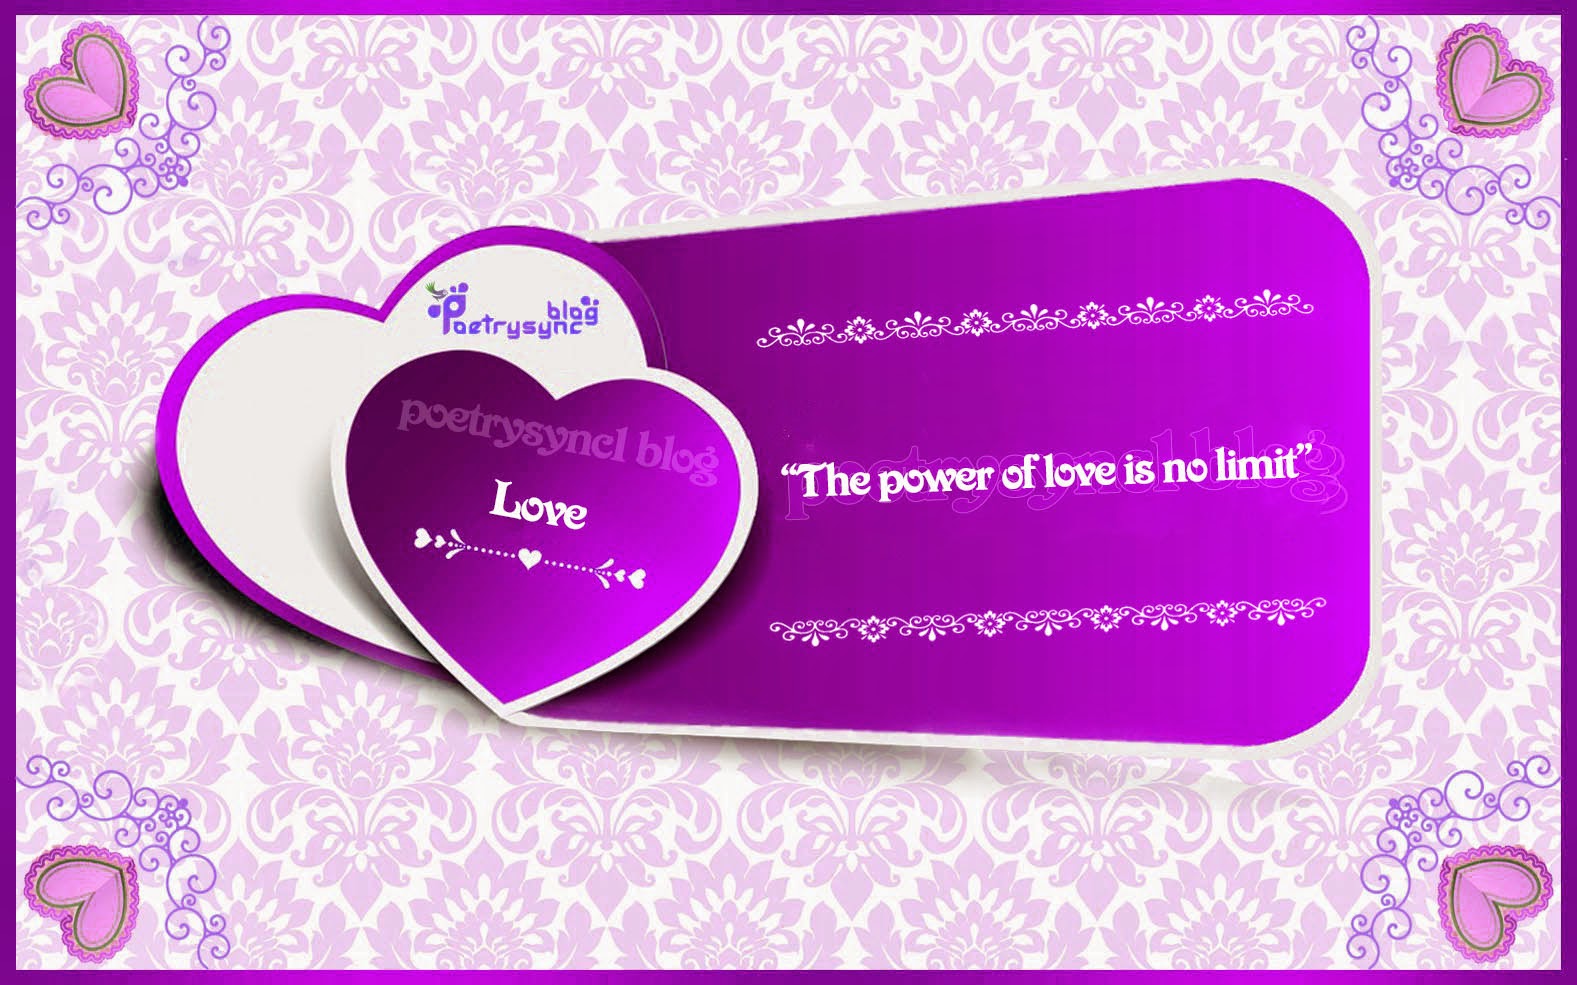 love-quotes-the-power-of-love-is-no-limit-by-poetrysync1-blog